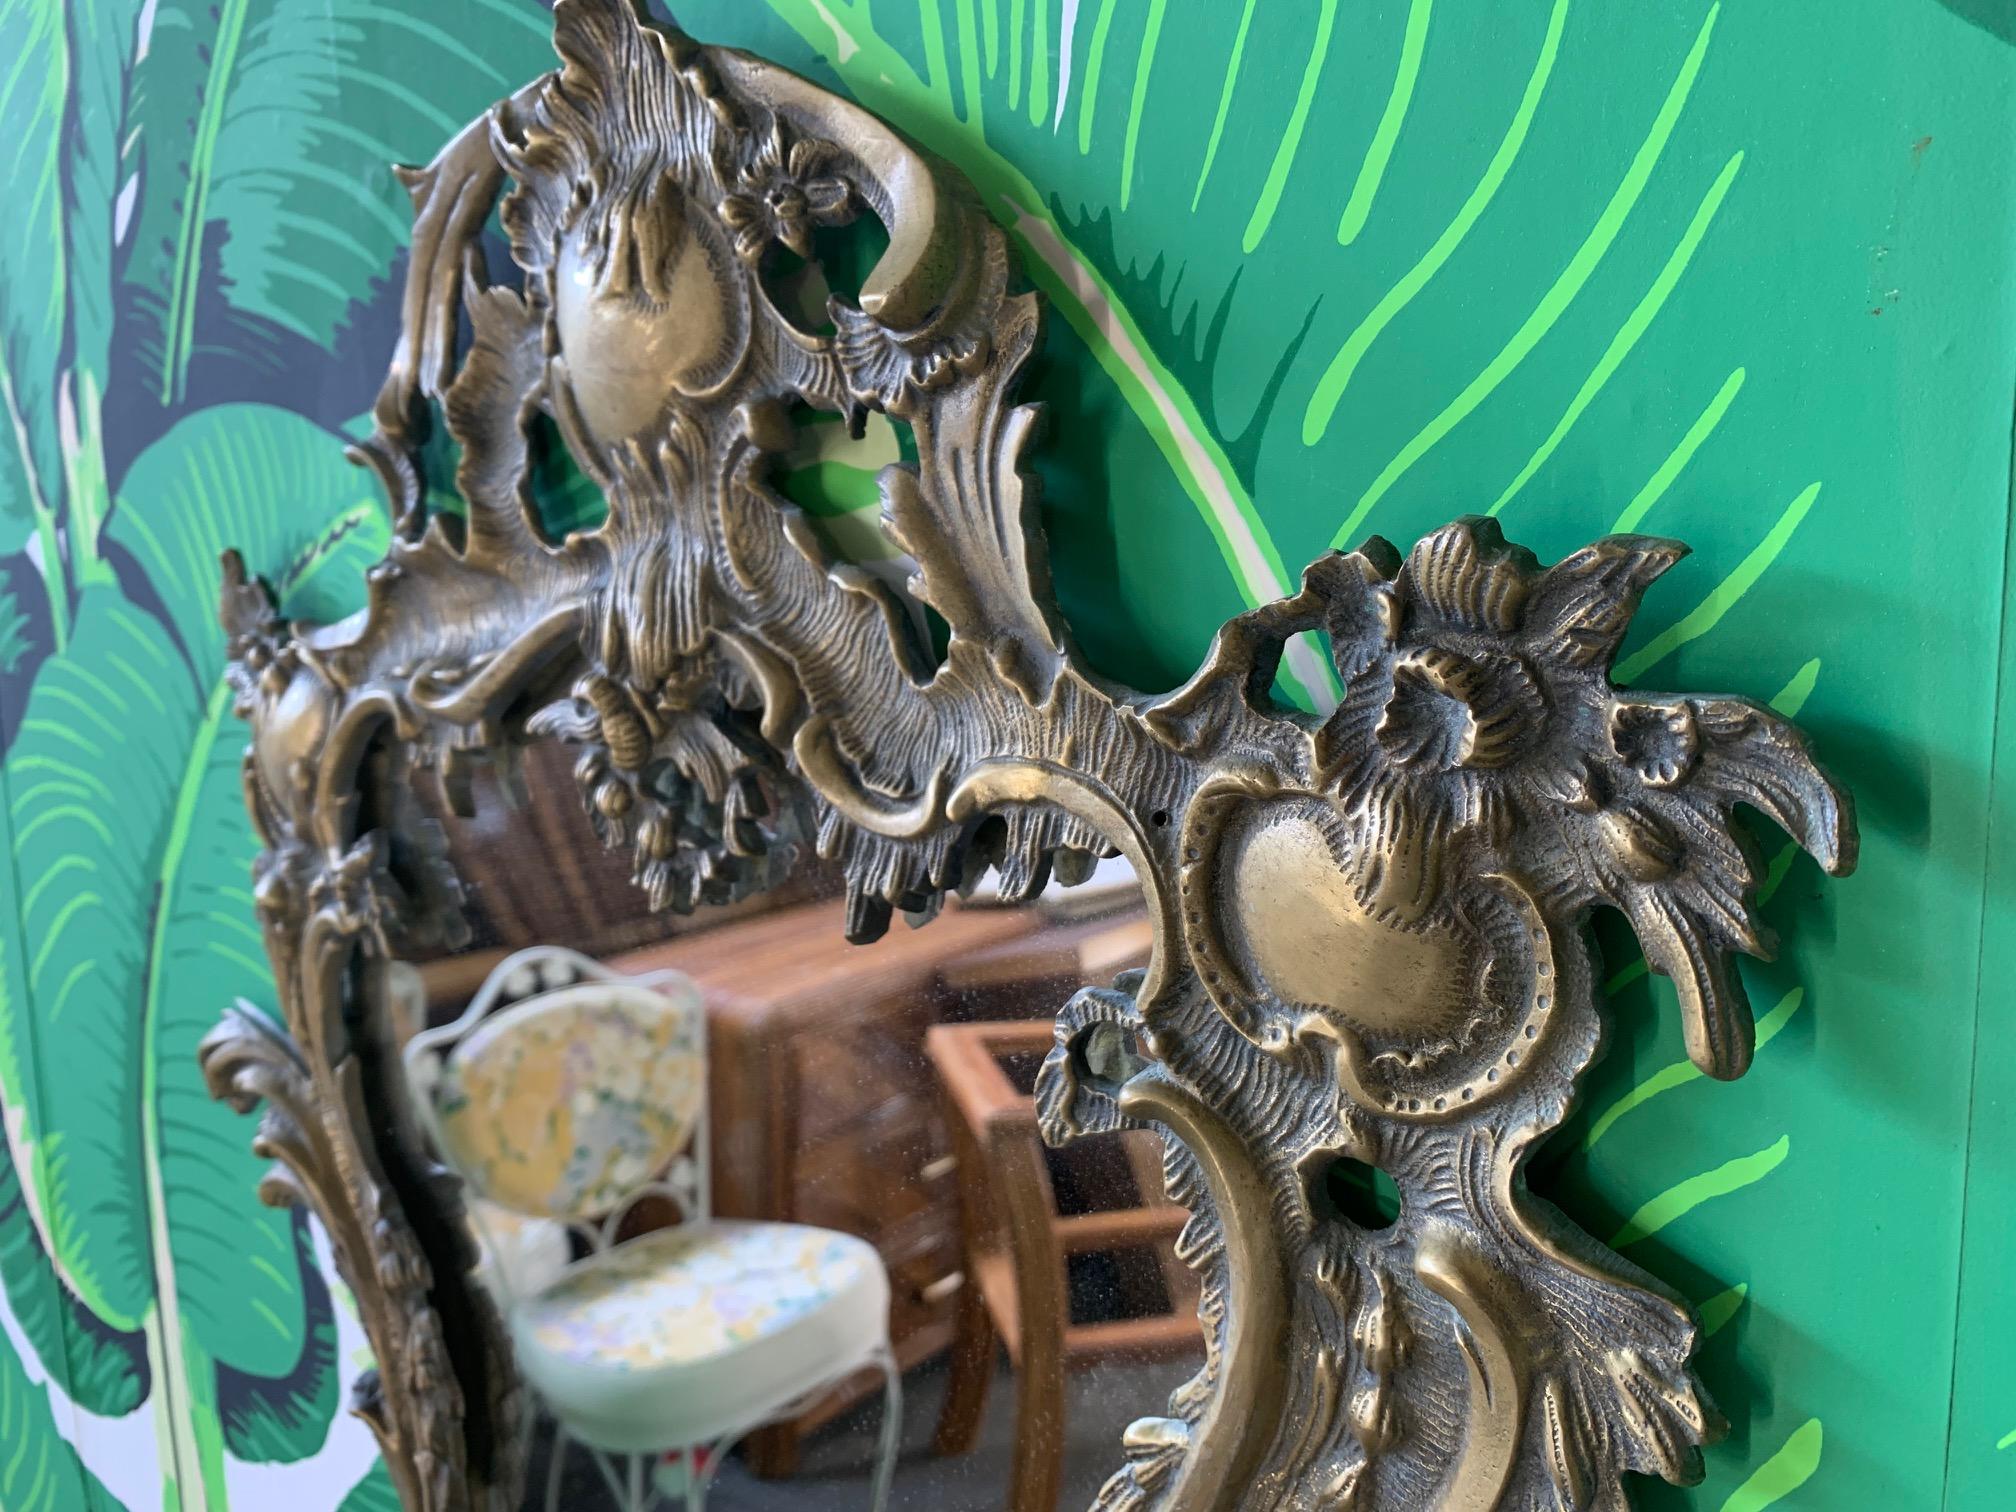 Antique Rococo-style mirror in gilt brass (ormolu). Rocaille-formed frame that makes a statement in any decor. Very good condition with no damage.